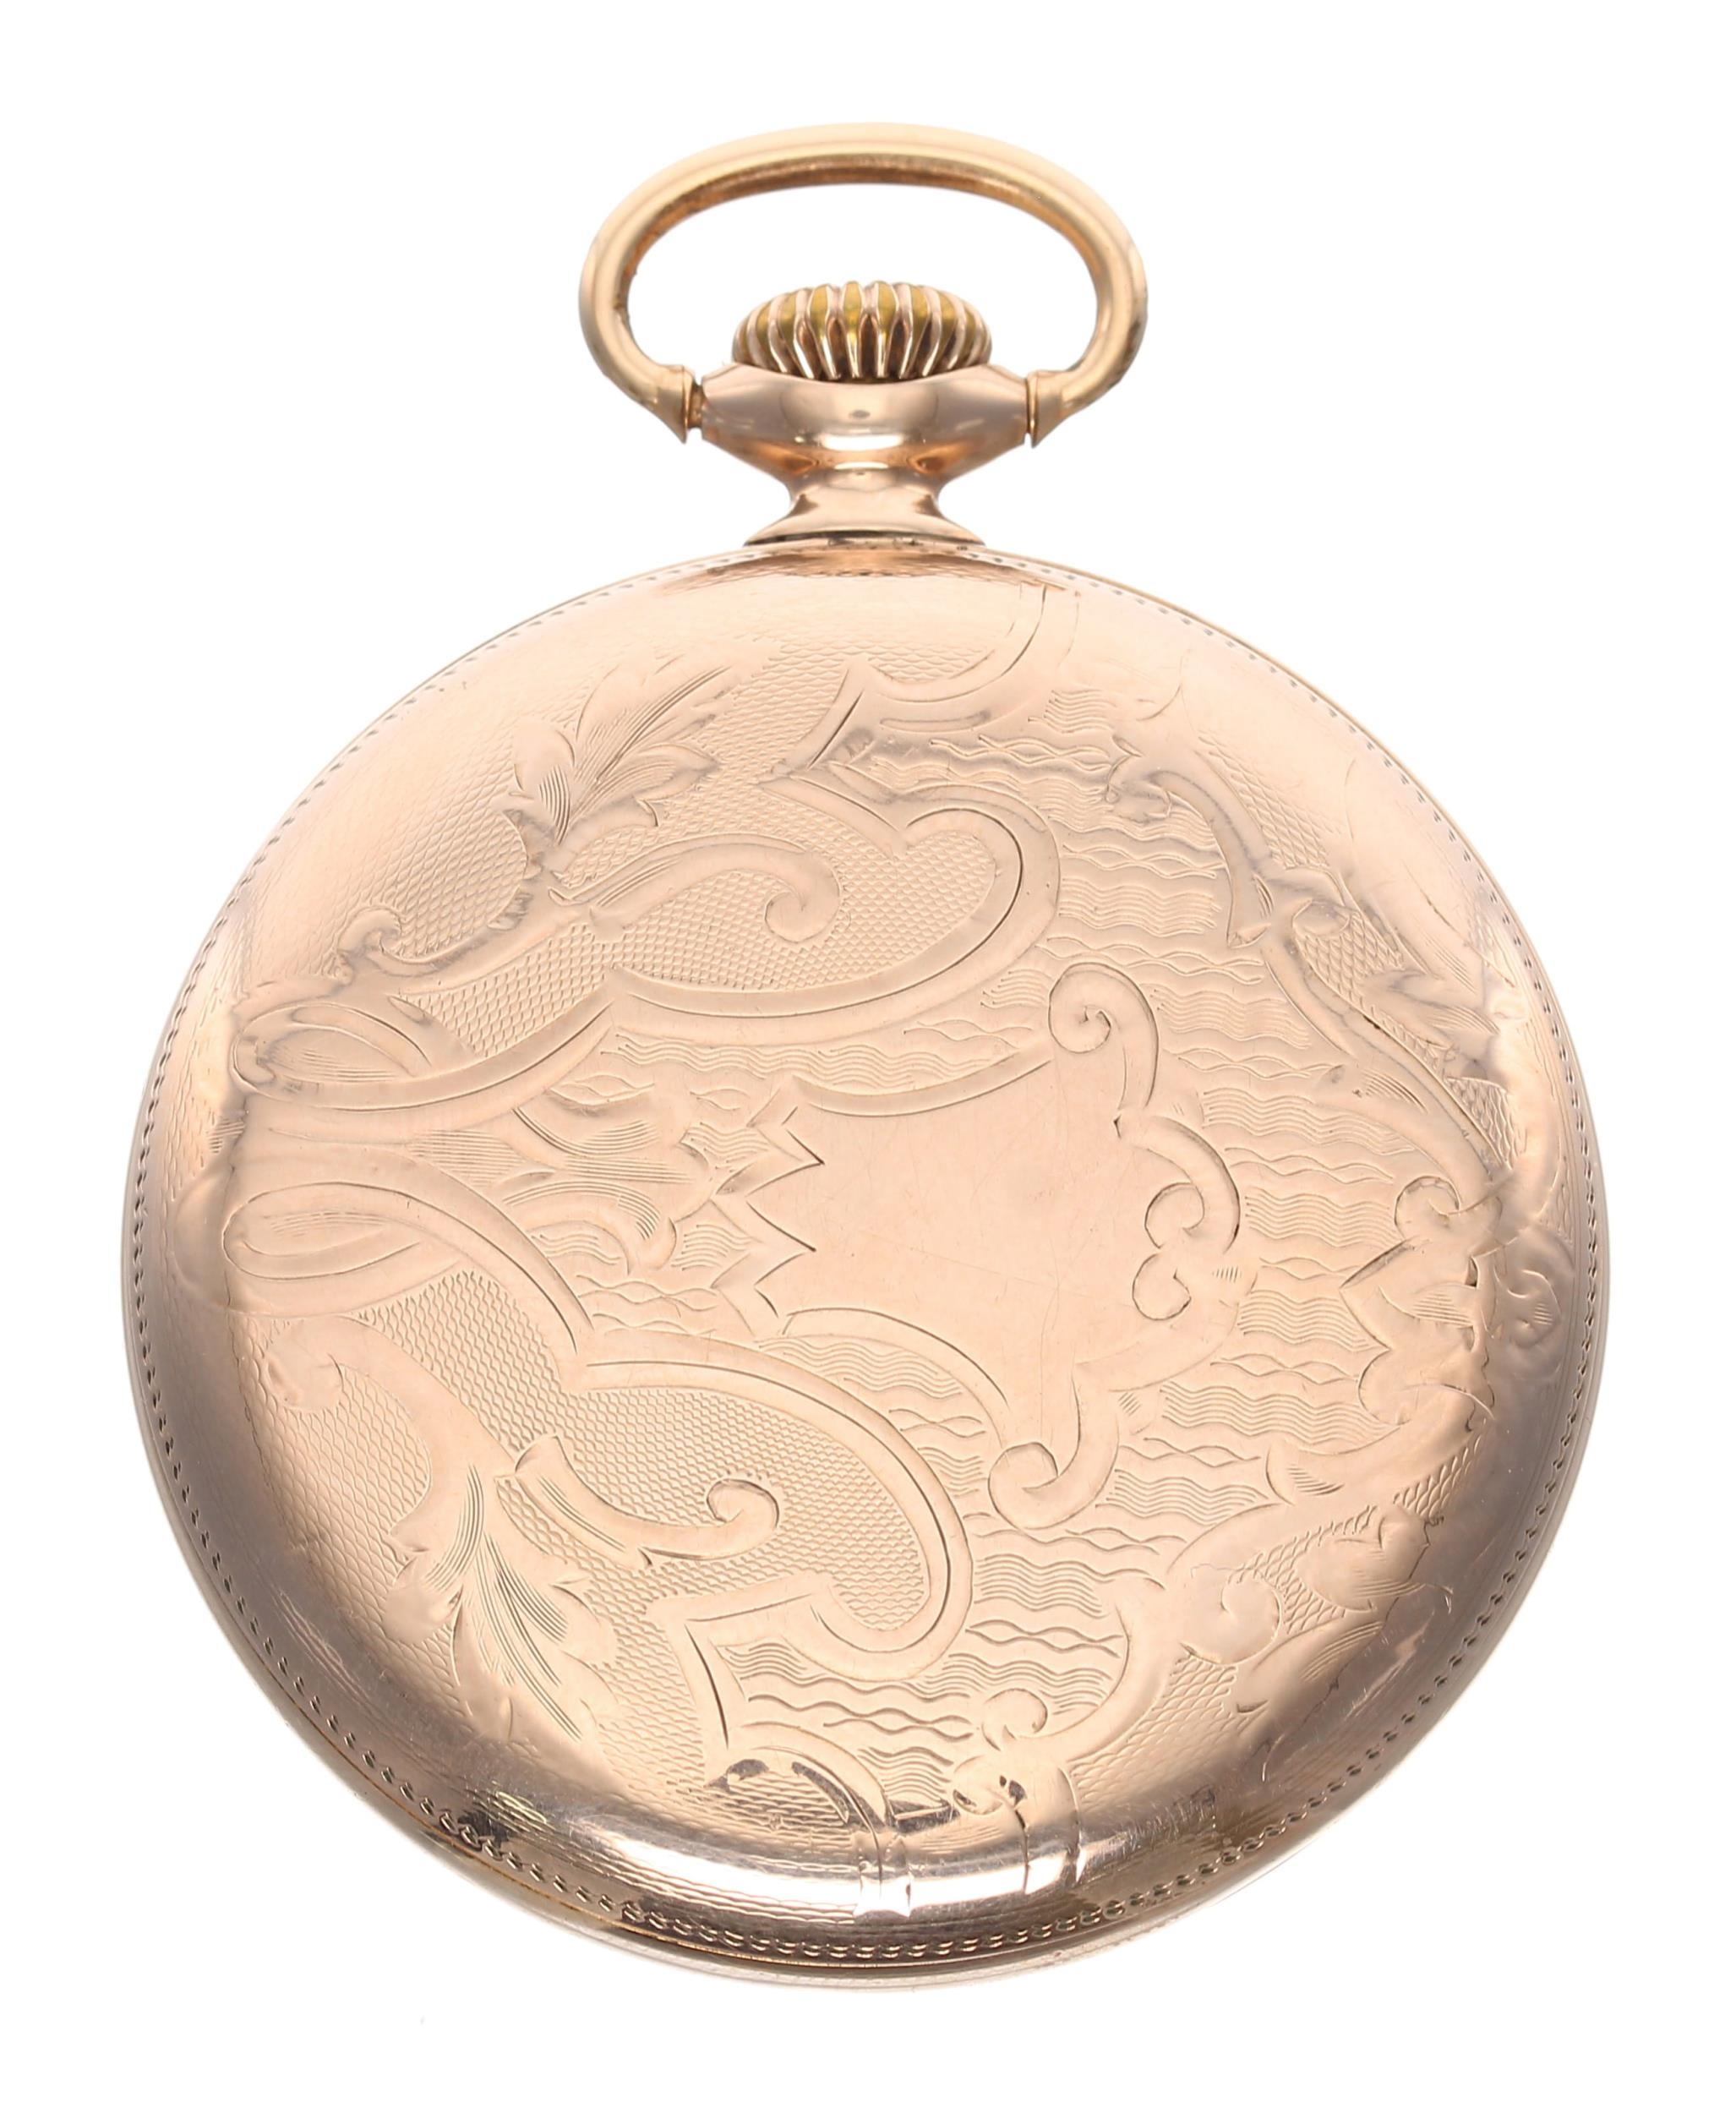 Hampden Watch Co. gold plated lever set pocket watch, circa 1905, signed 23 jewel adjusted to five - Image 4 of 4